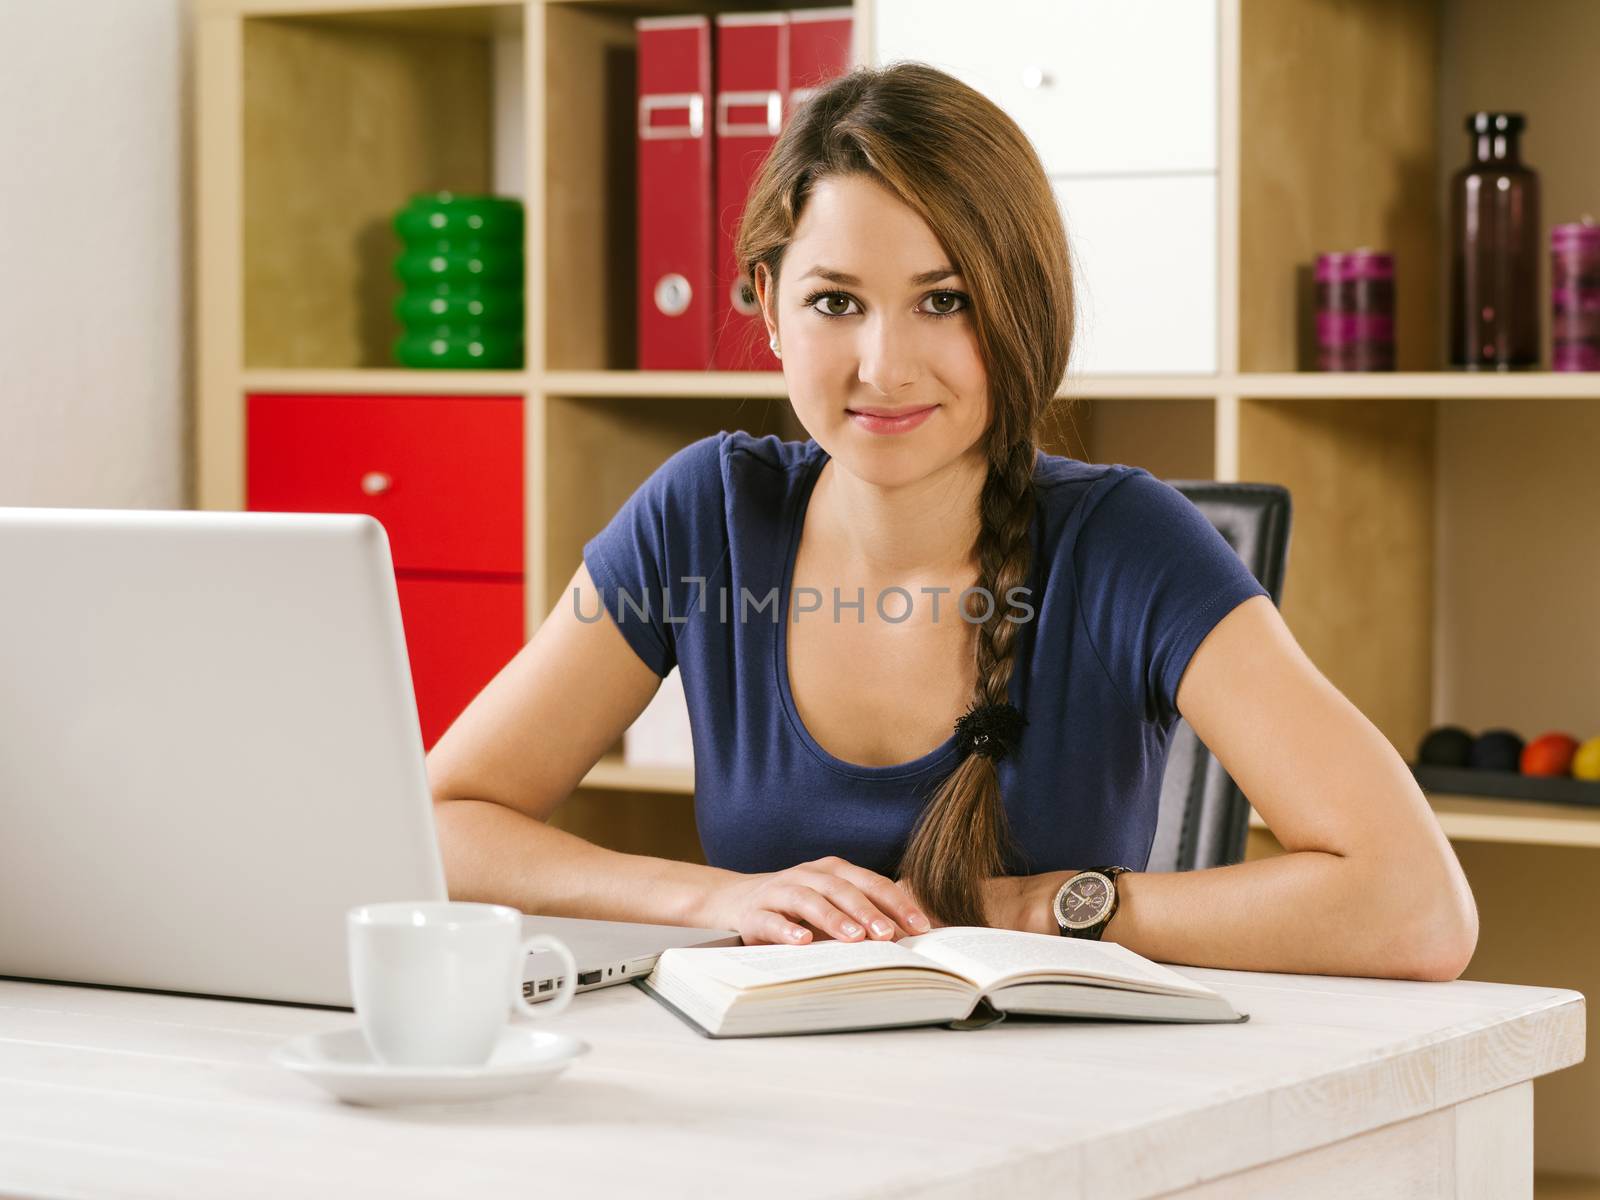 Student studying in front of laptop by sumners